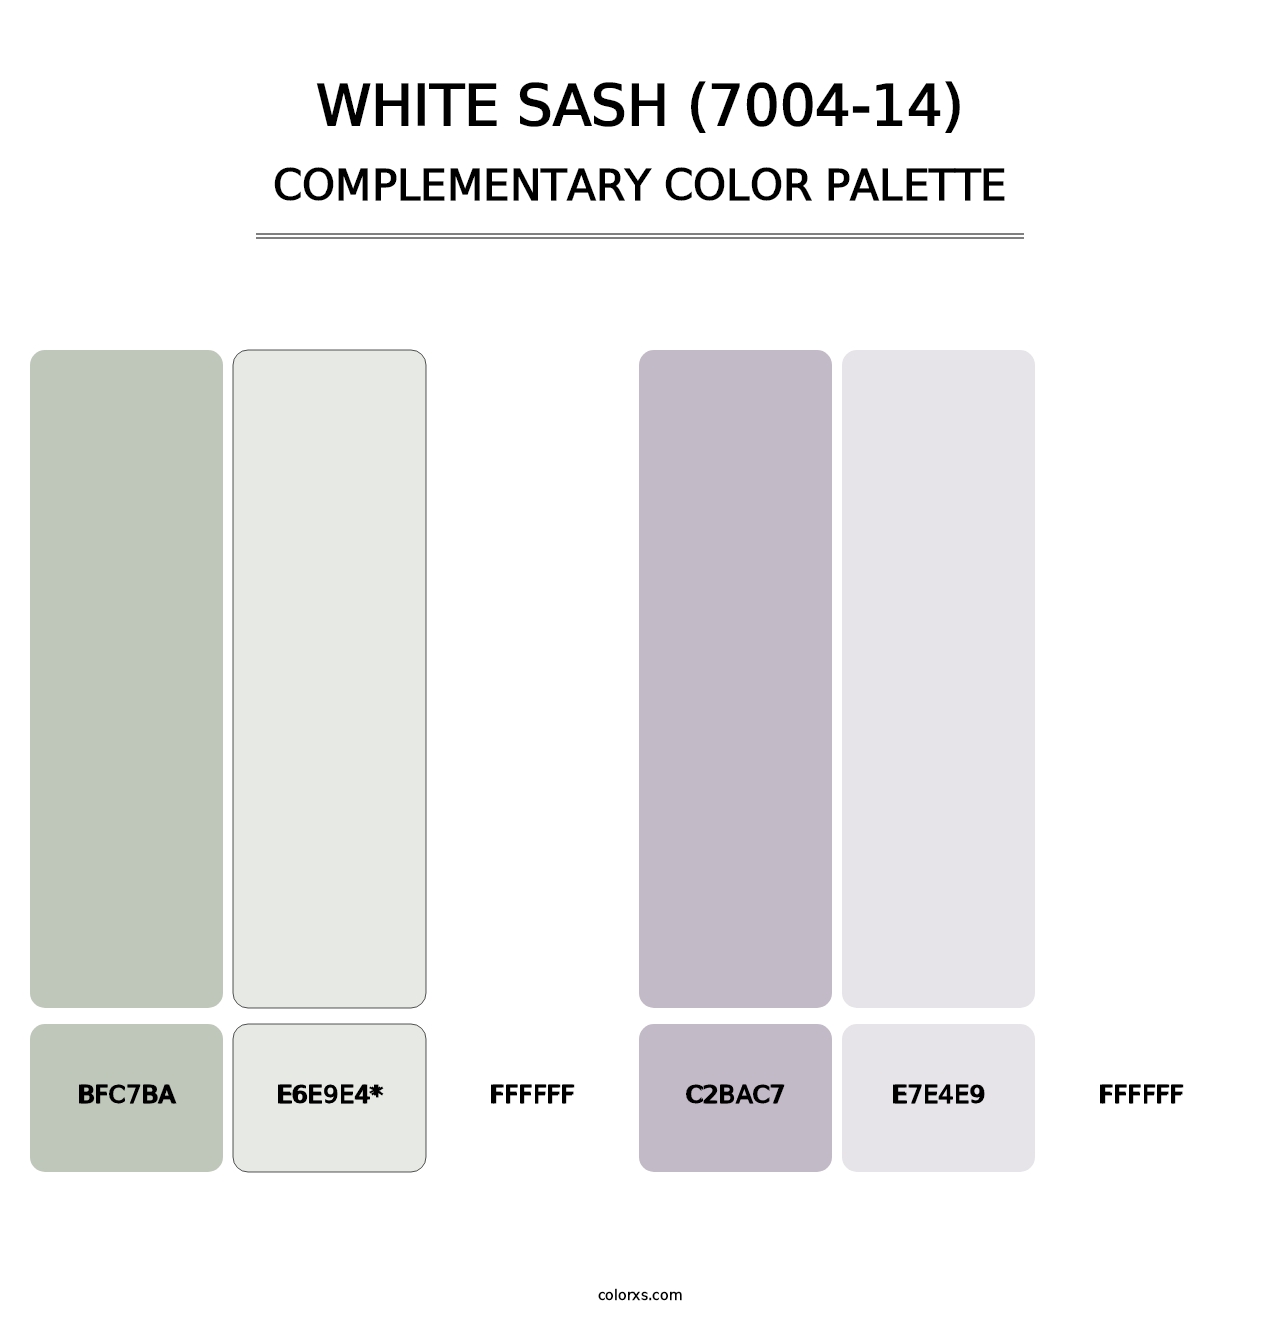 White Sash (7004-14) - Complementary Color Palette